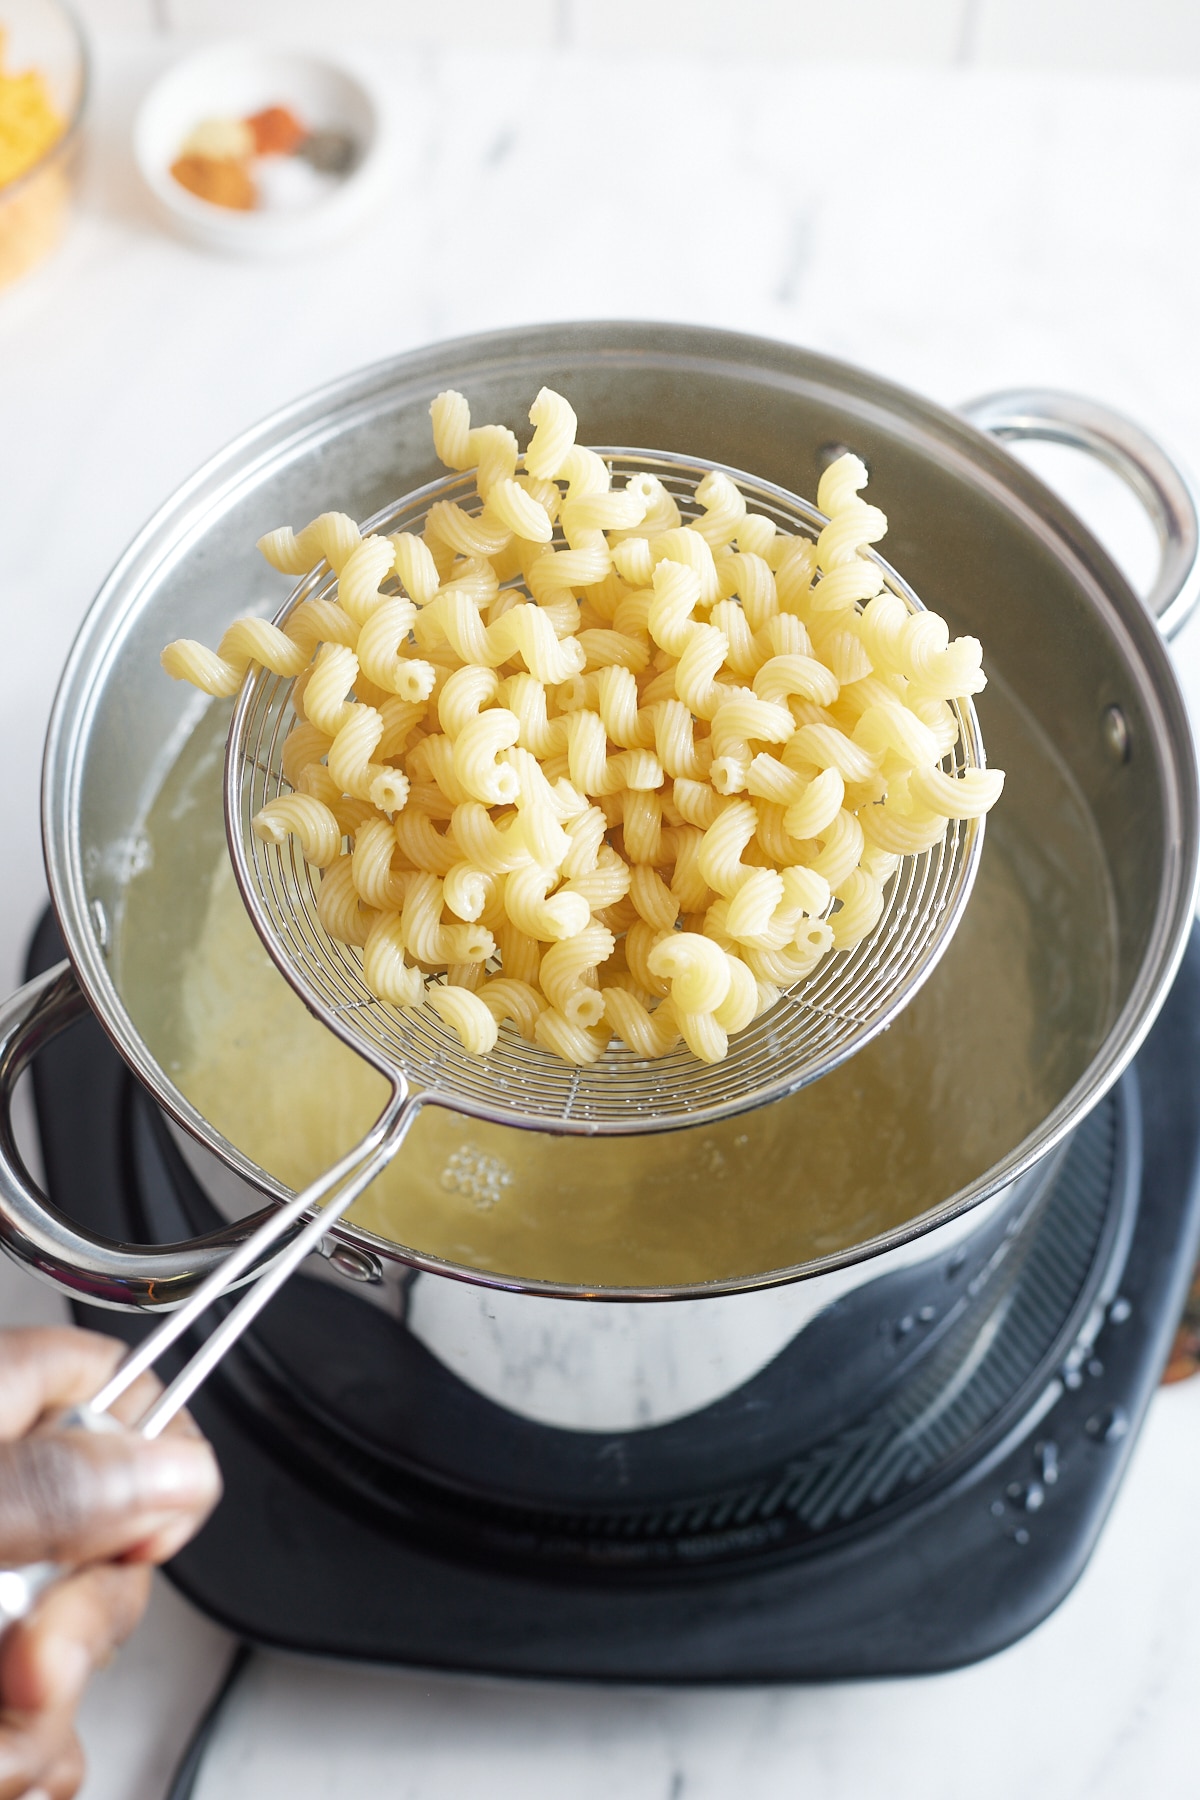 Draining the cooked macaroni.